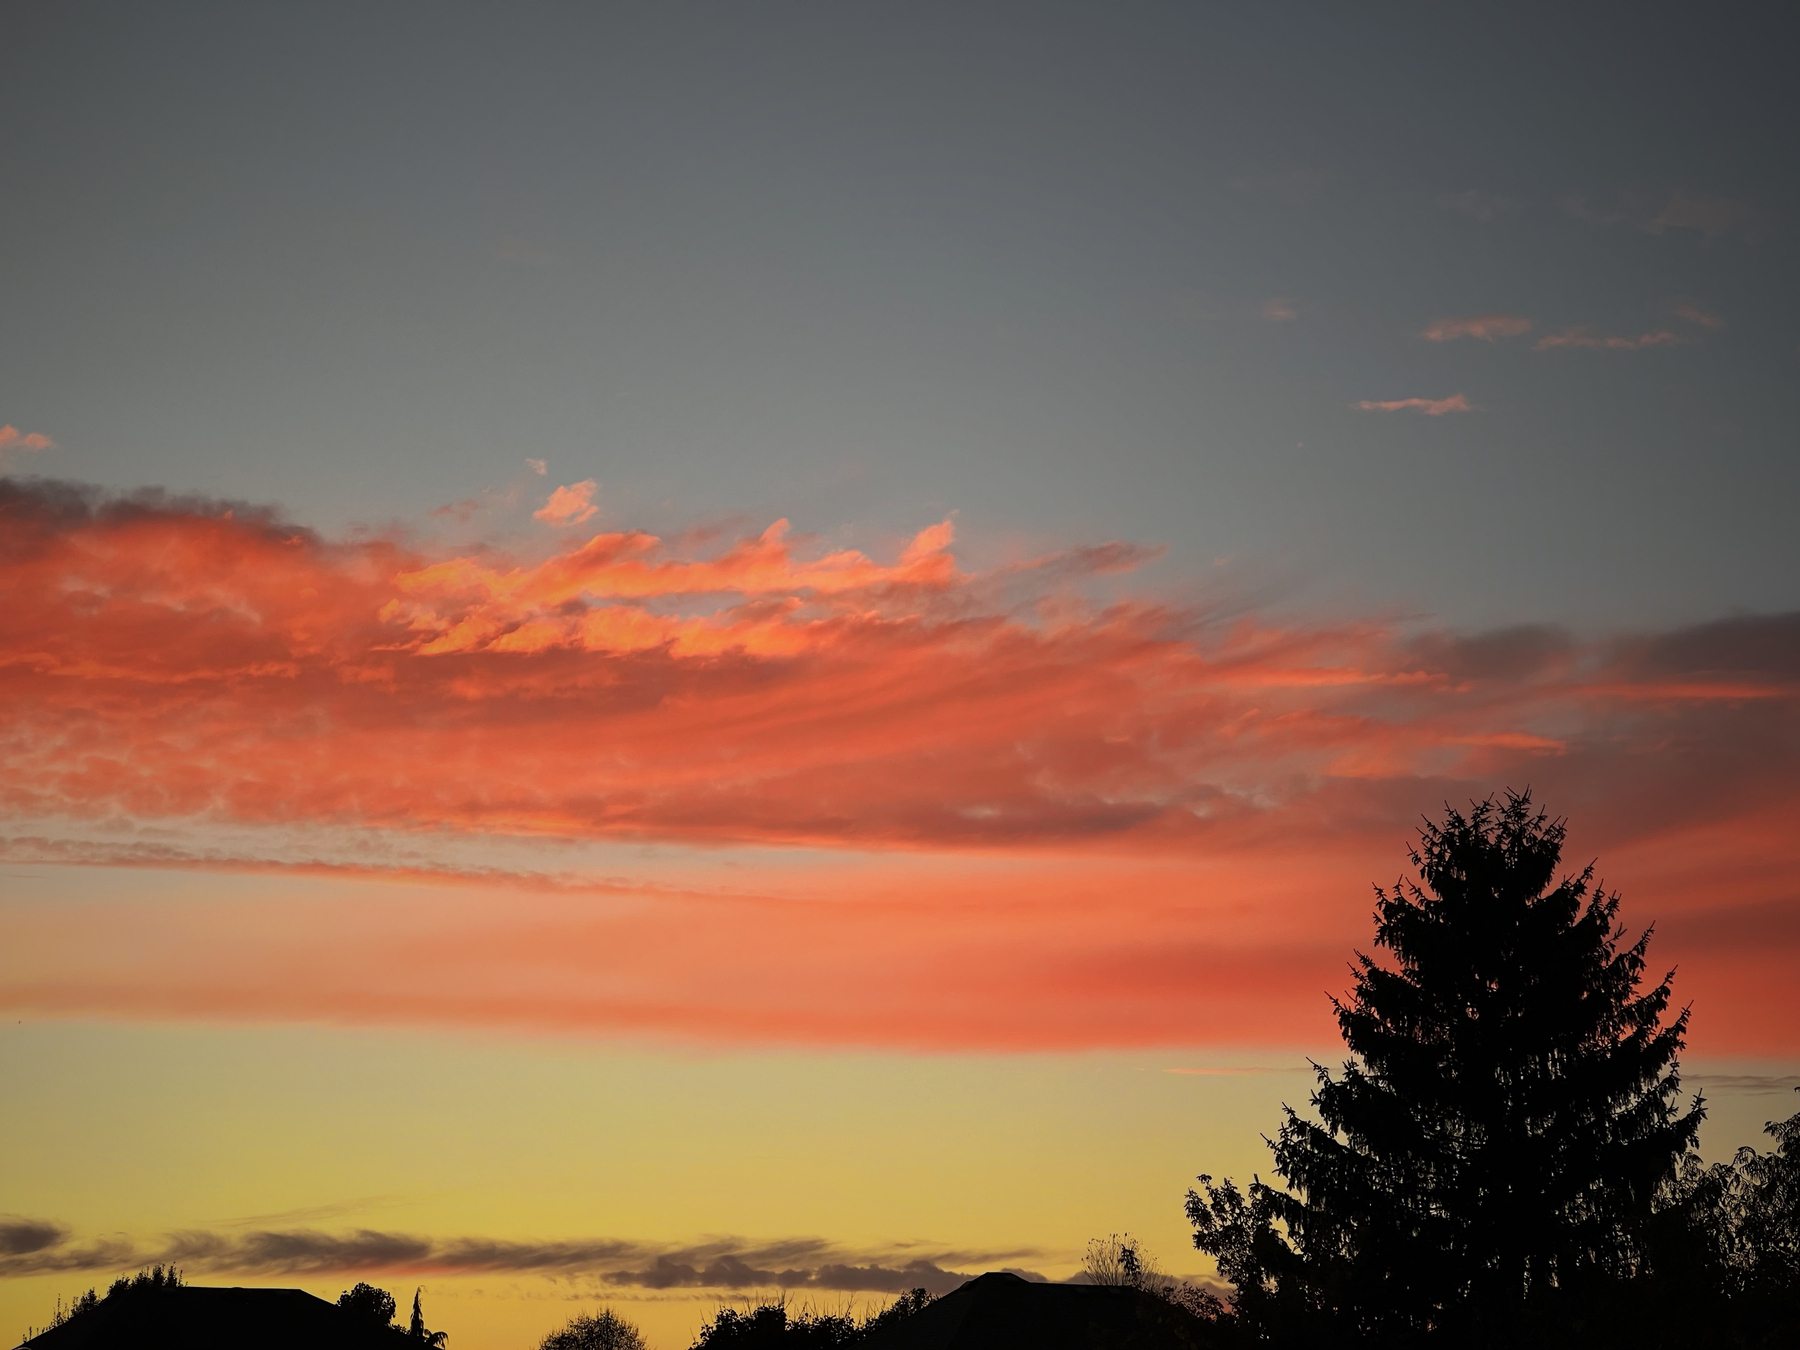 Photo: An early evening sunset with a gradient in the sky from blue at the top to yellowish at the bottom. Silhouettes of the houses and a pine tree are at the bottom and right corner. About halfway up in the sky are pink clouds highlighted by the setting sun.